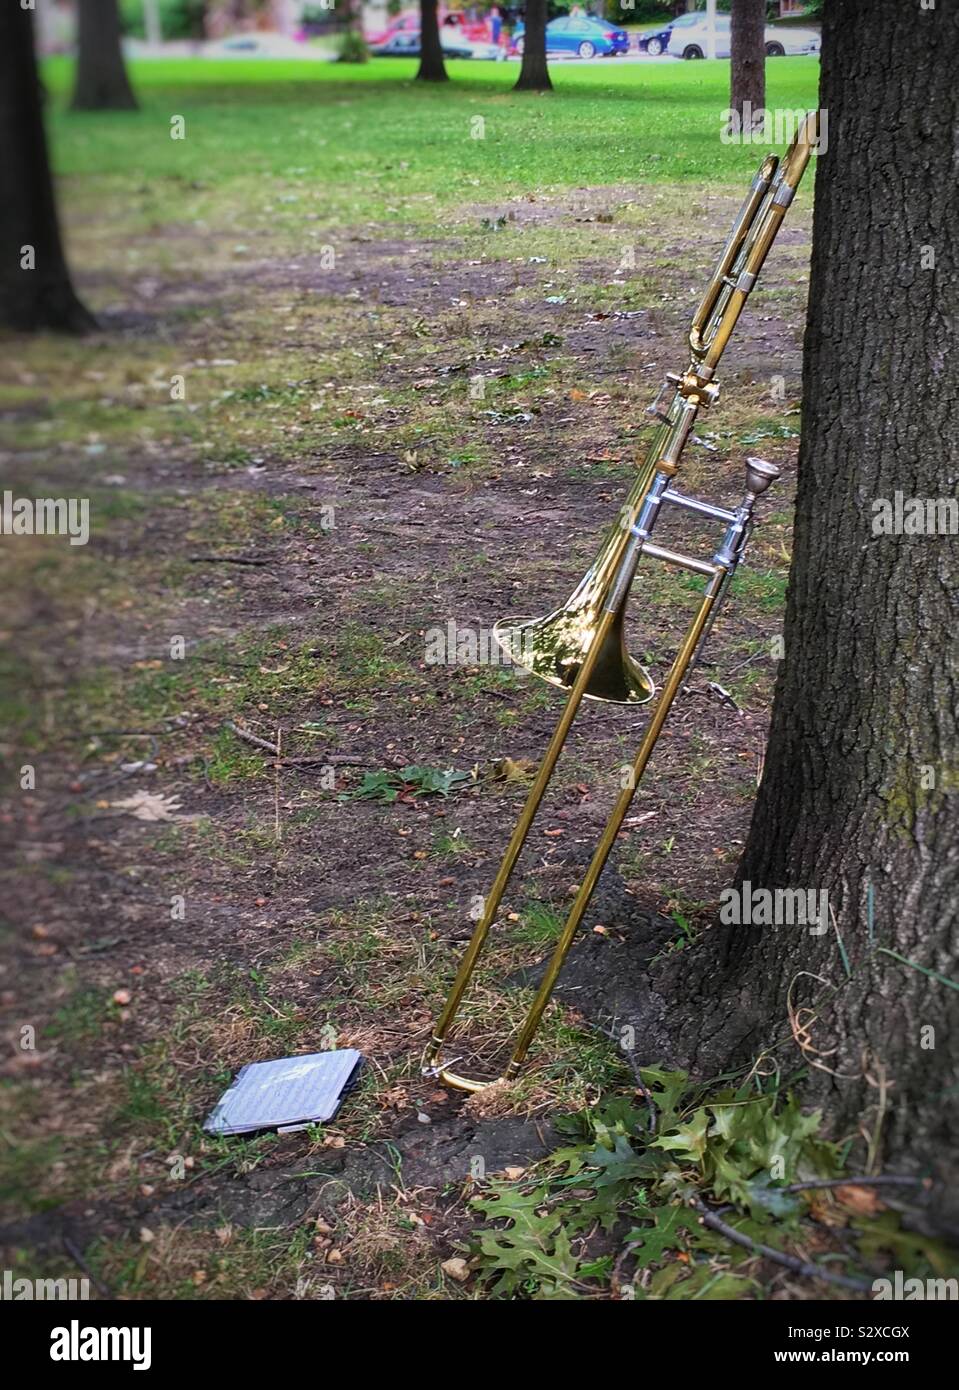 Brass instrument leaning against at tree in a park, music notes on the ground Stock Photo